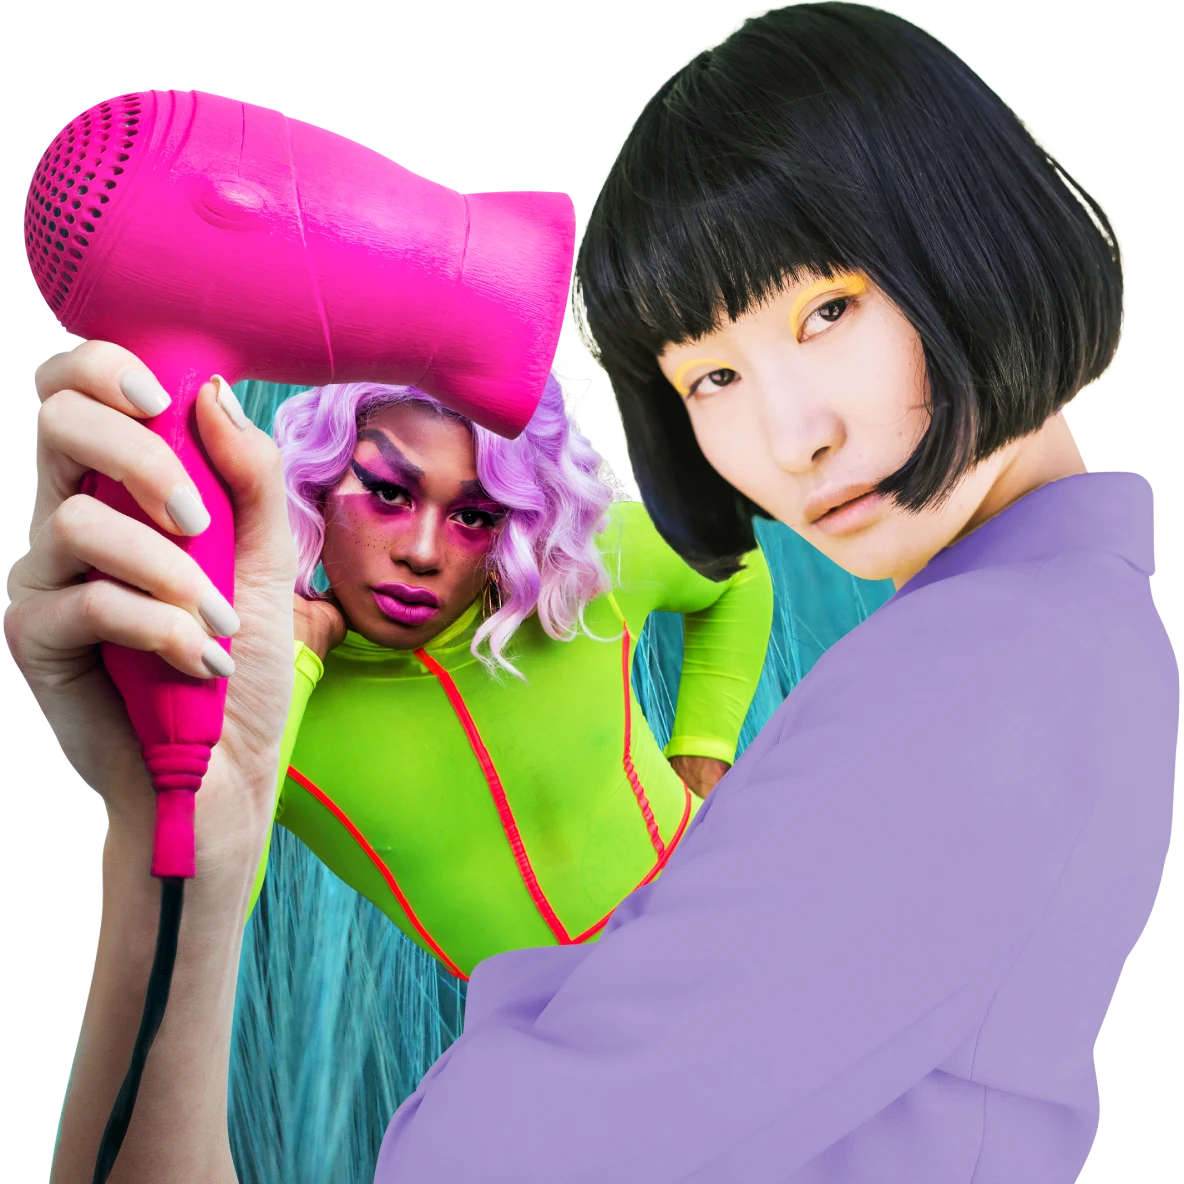 East Asian woman holding a large dark pink hair dryer. Black woman in the background in a purple wig and neon green long-sleeved top.